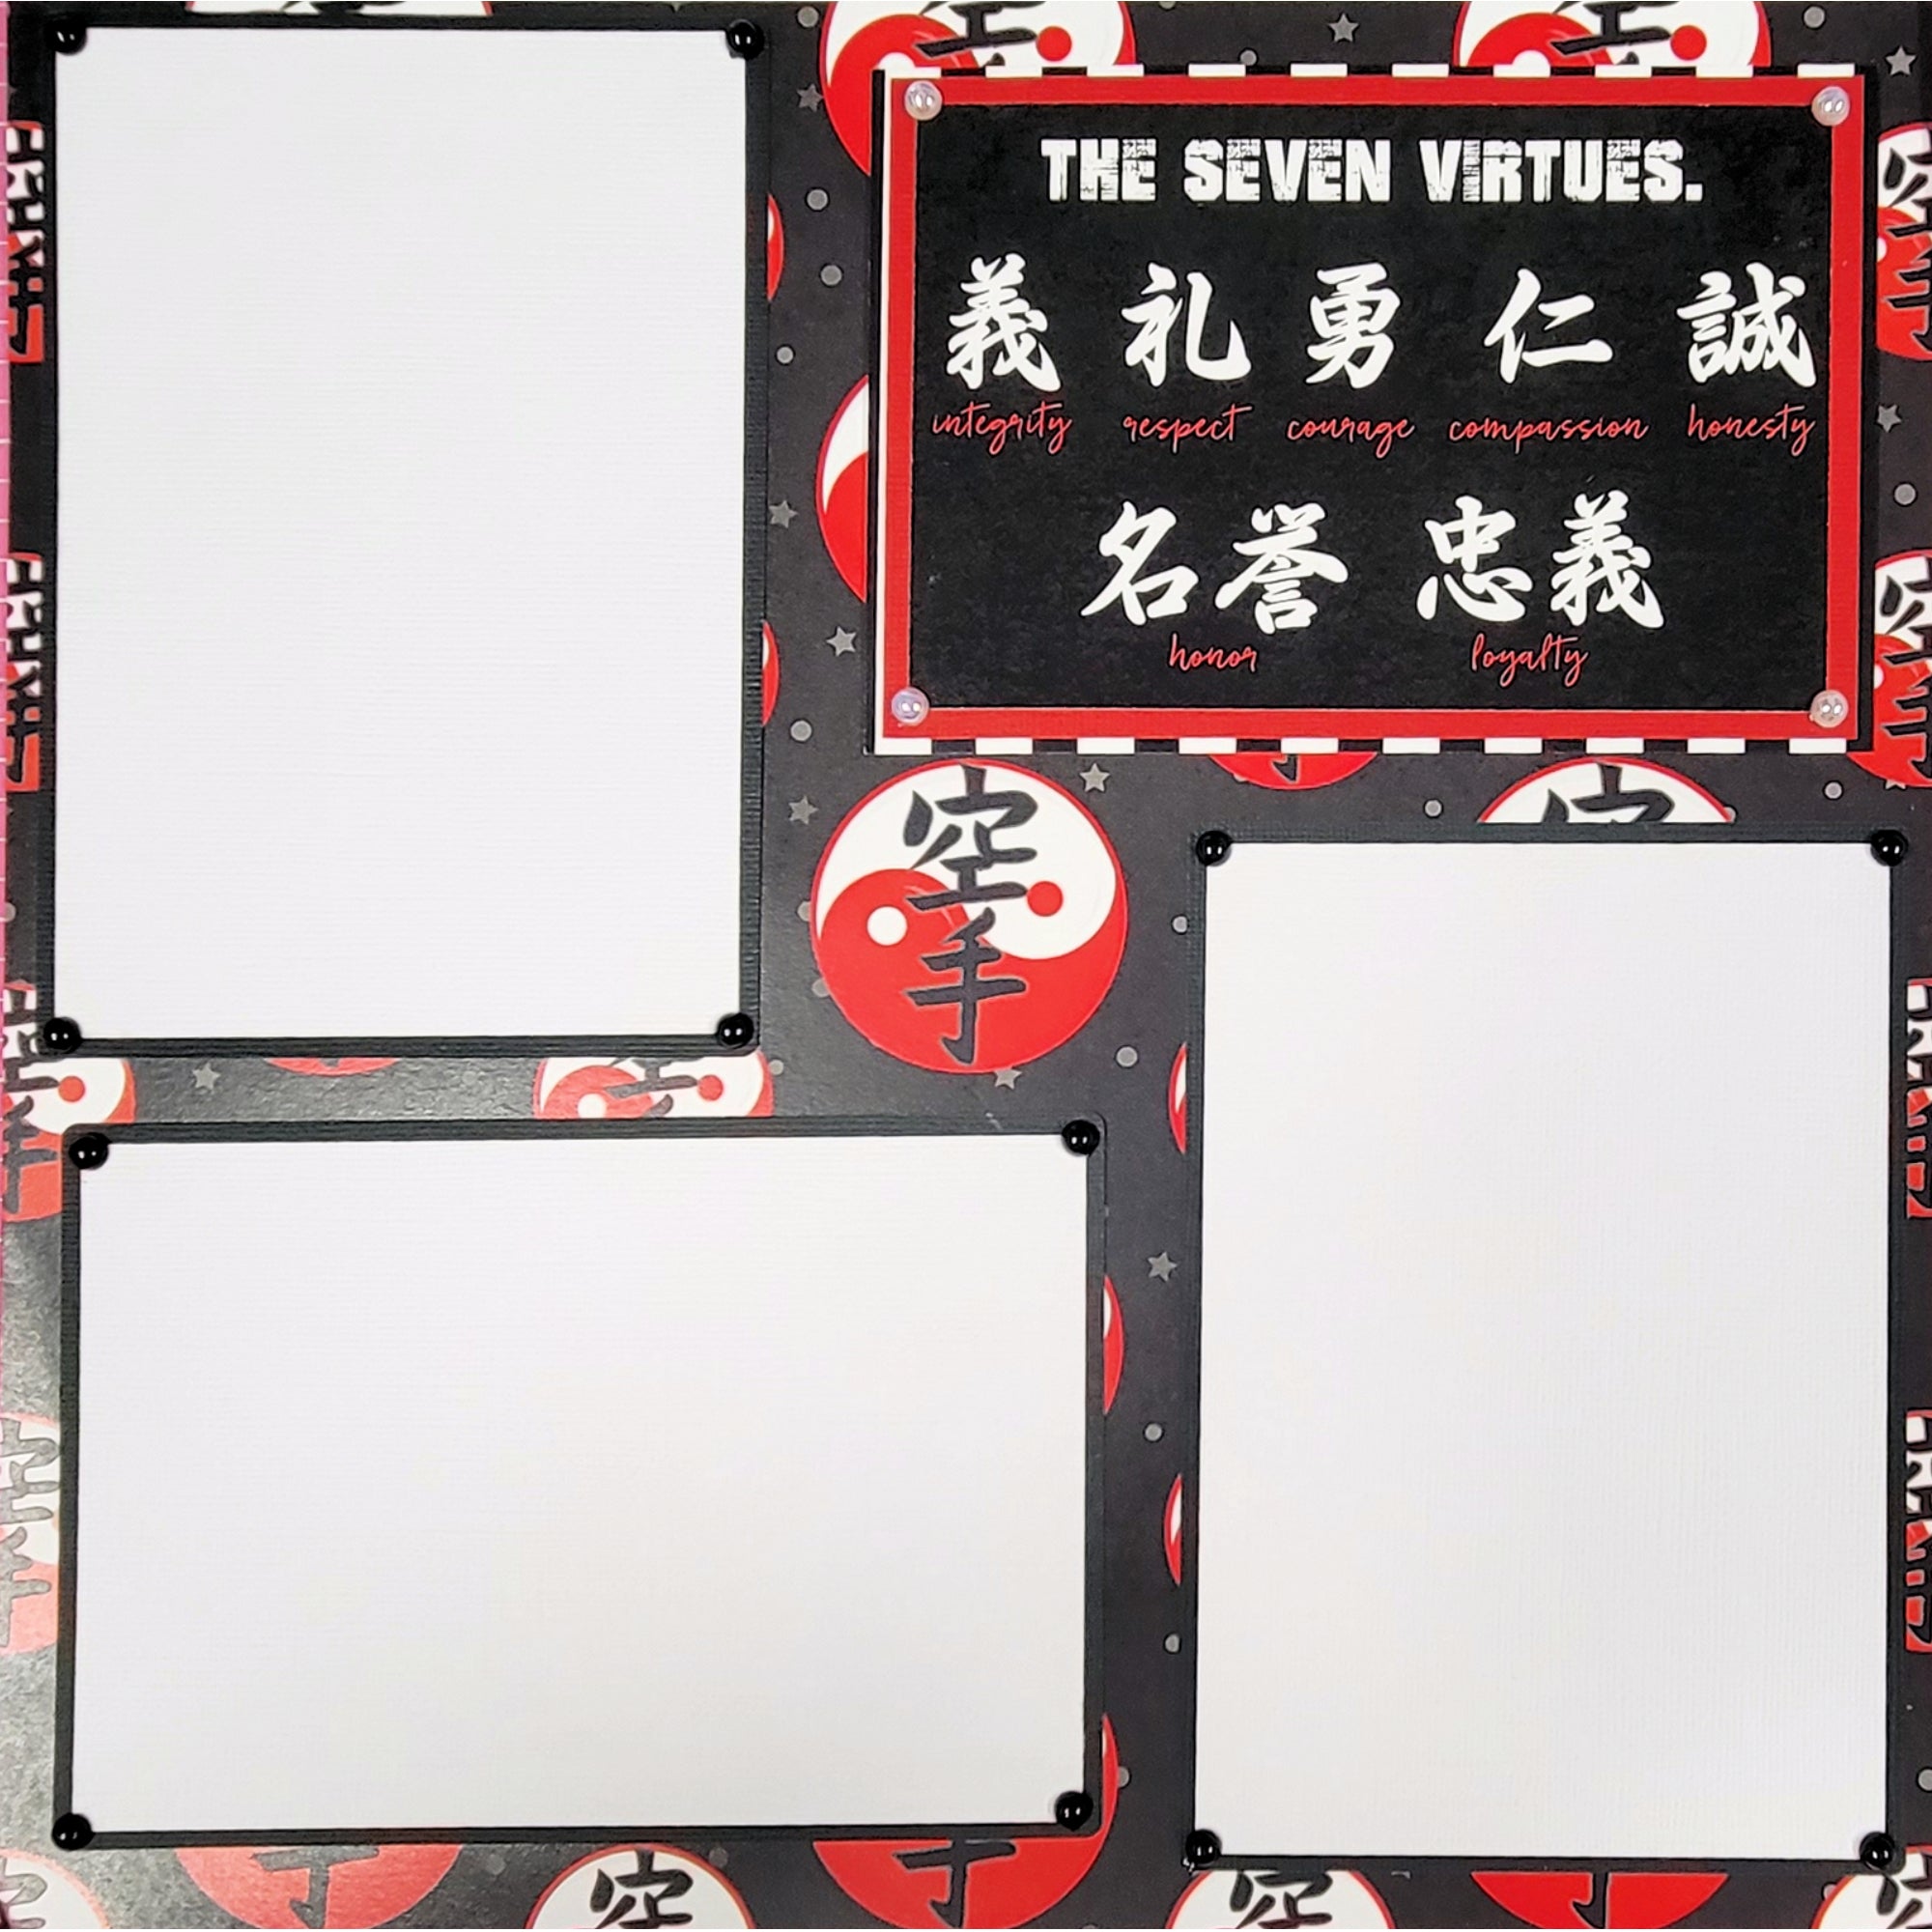 The Seven Virtues Karate (2) - 12 x 12 Pages, Fully-Assembled & Hand-Crafted 3D Scrapbook Premade by SSC Designs